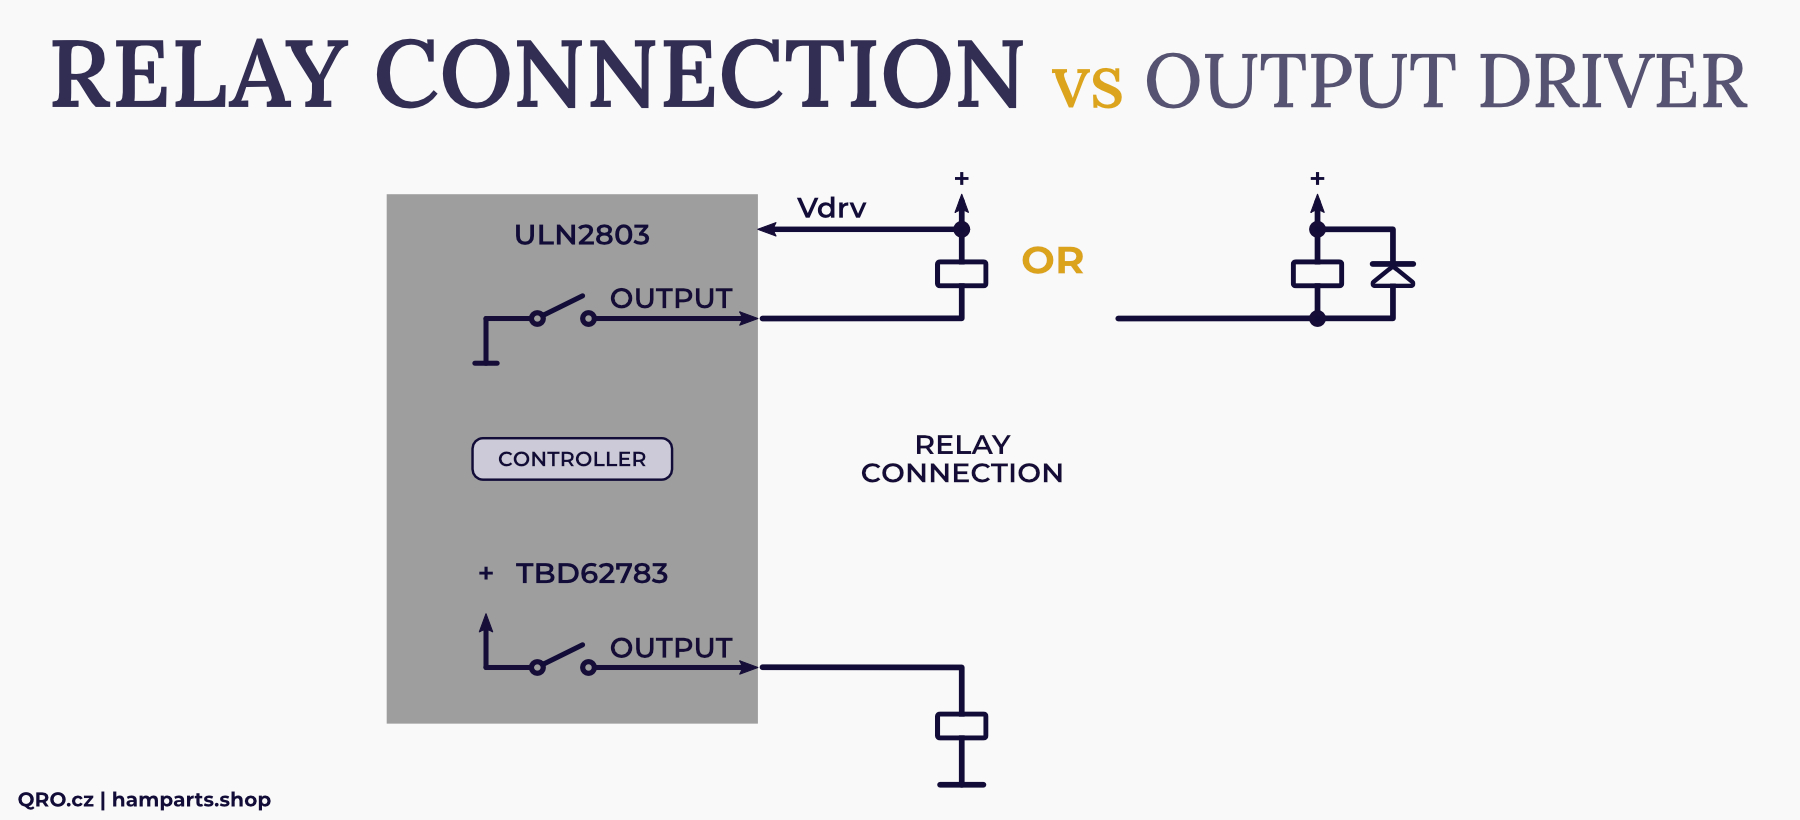 easy controller relay connection versus output driver qro.cz hamparts.shop